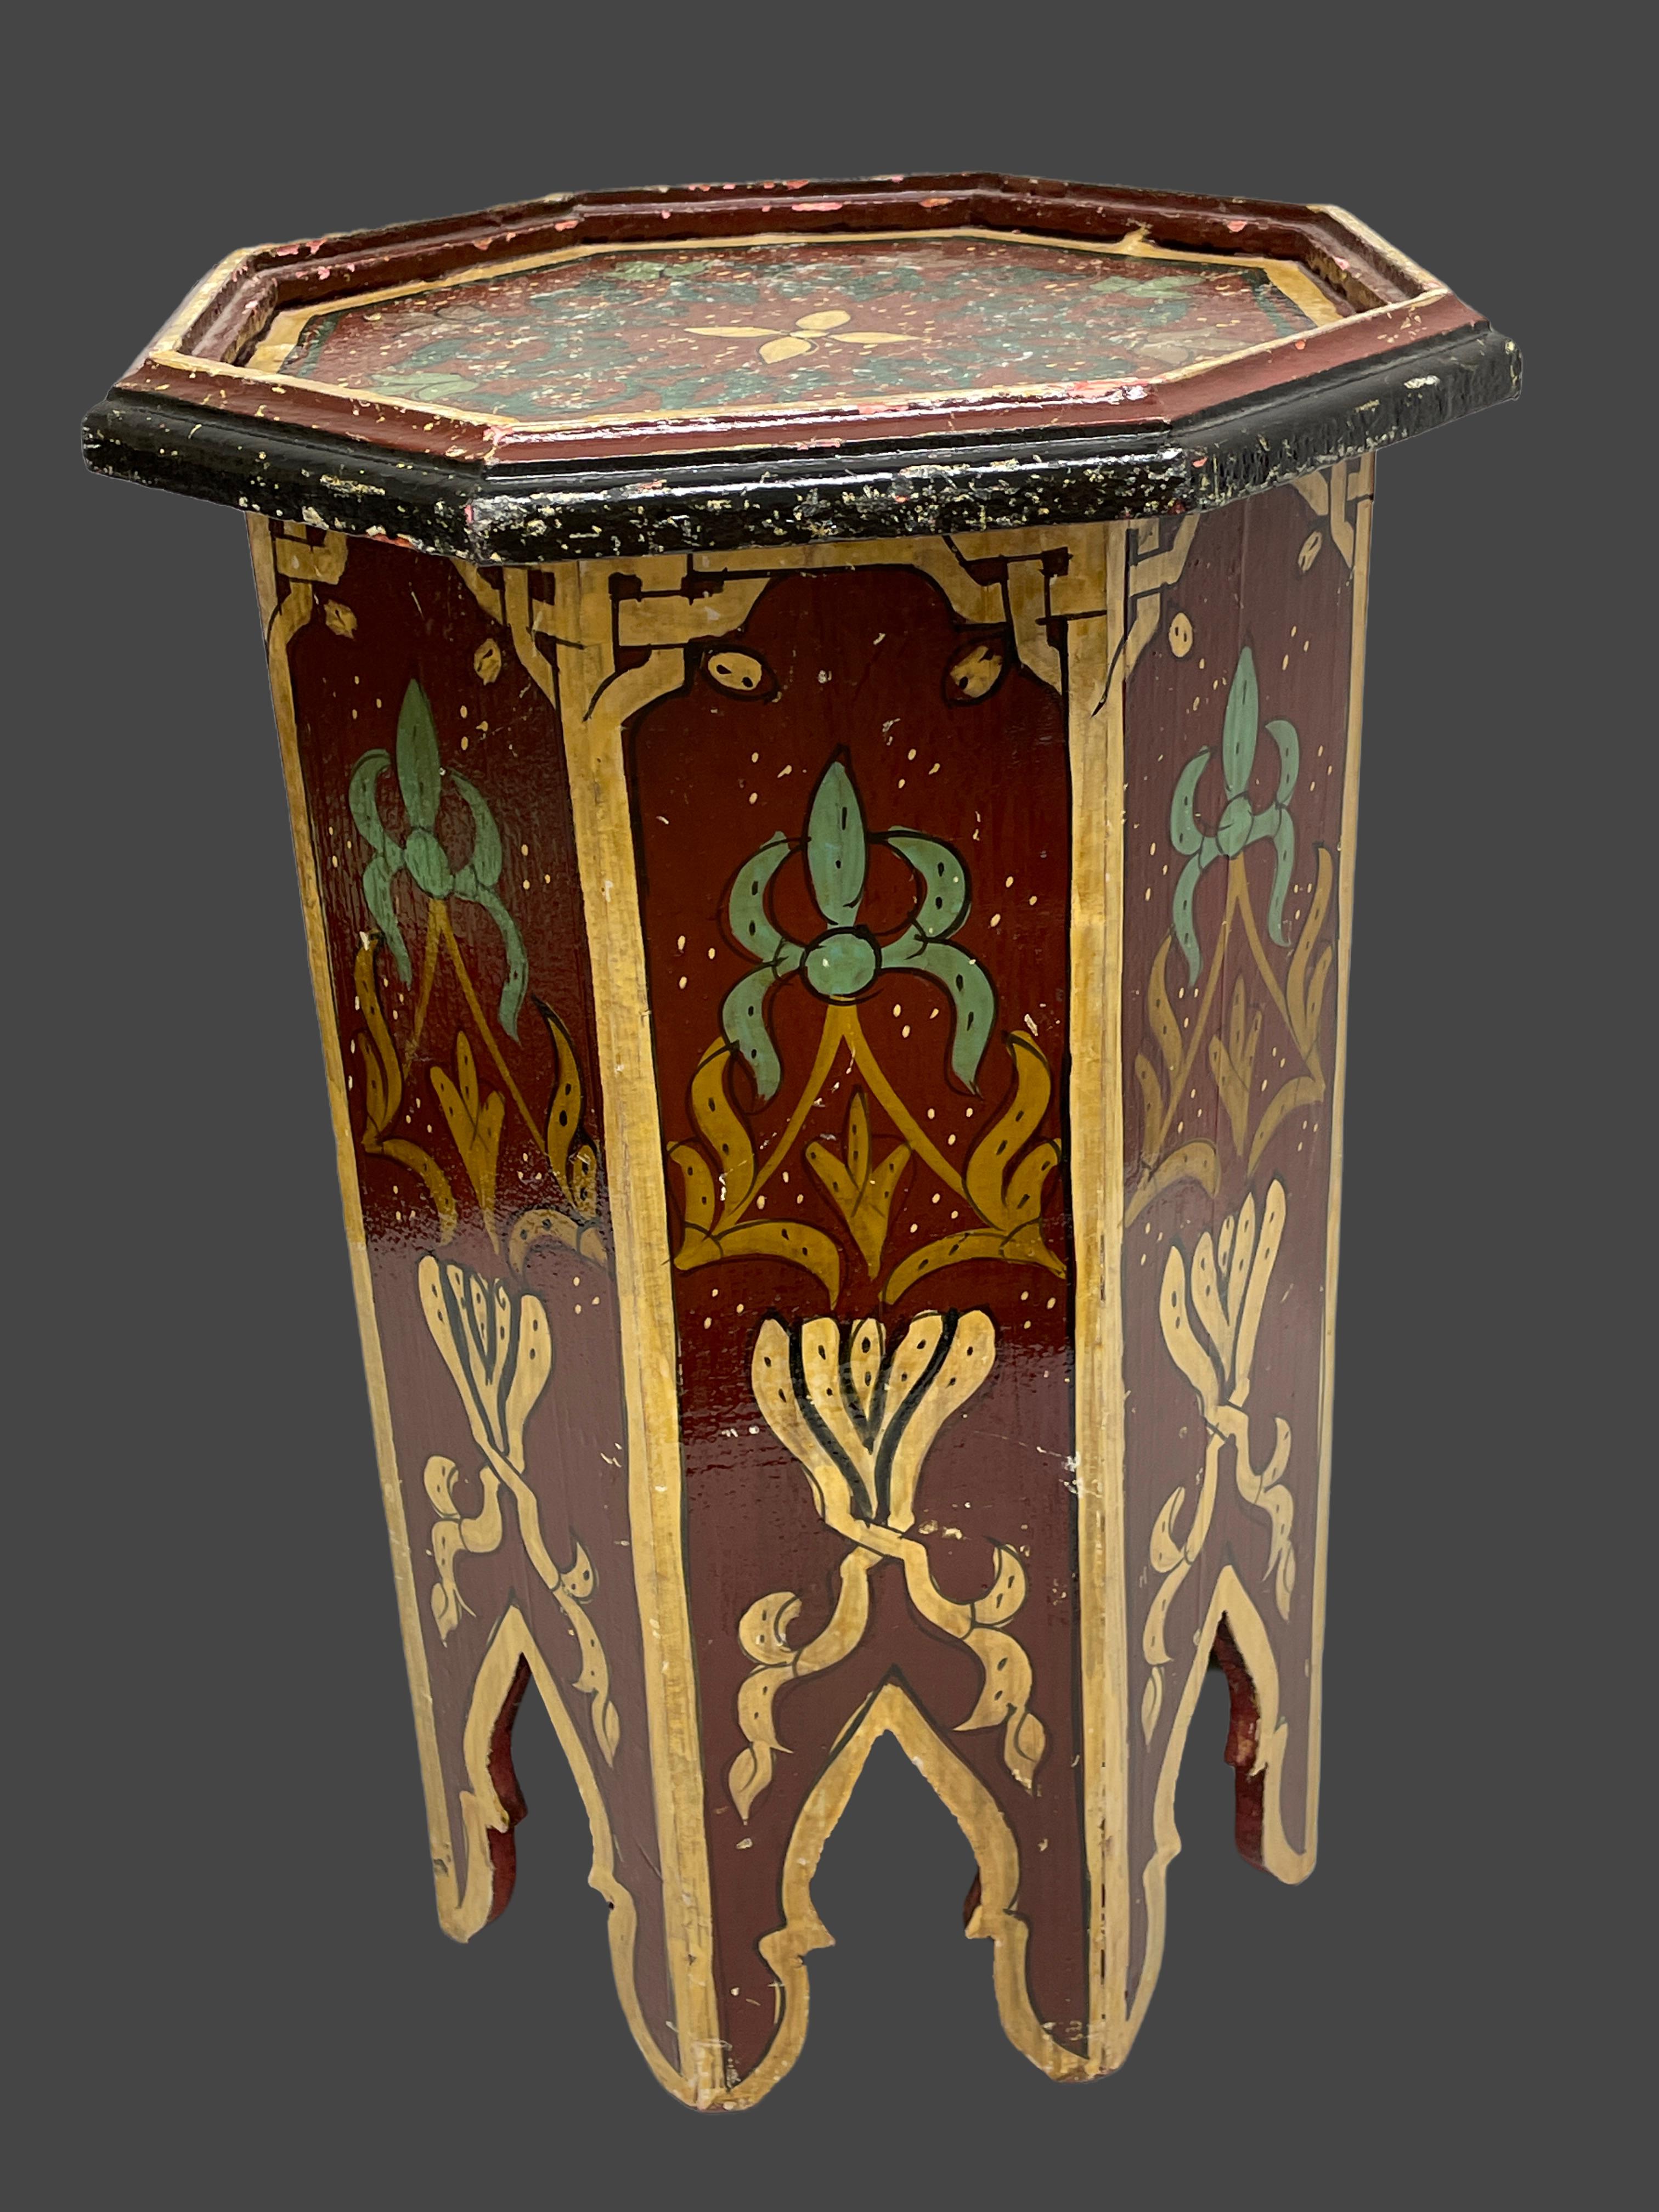 Moroccan Style Diminutive Painted Hexagonal Table 1